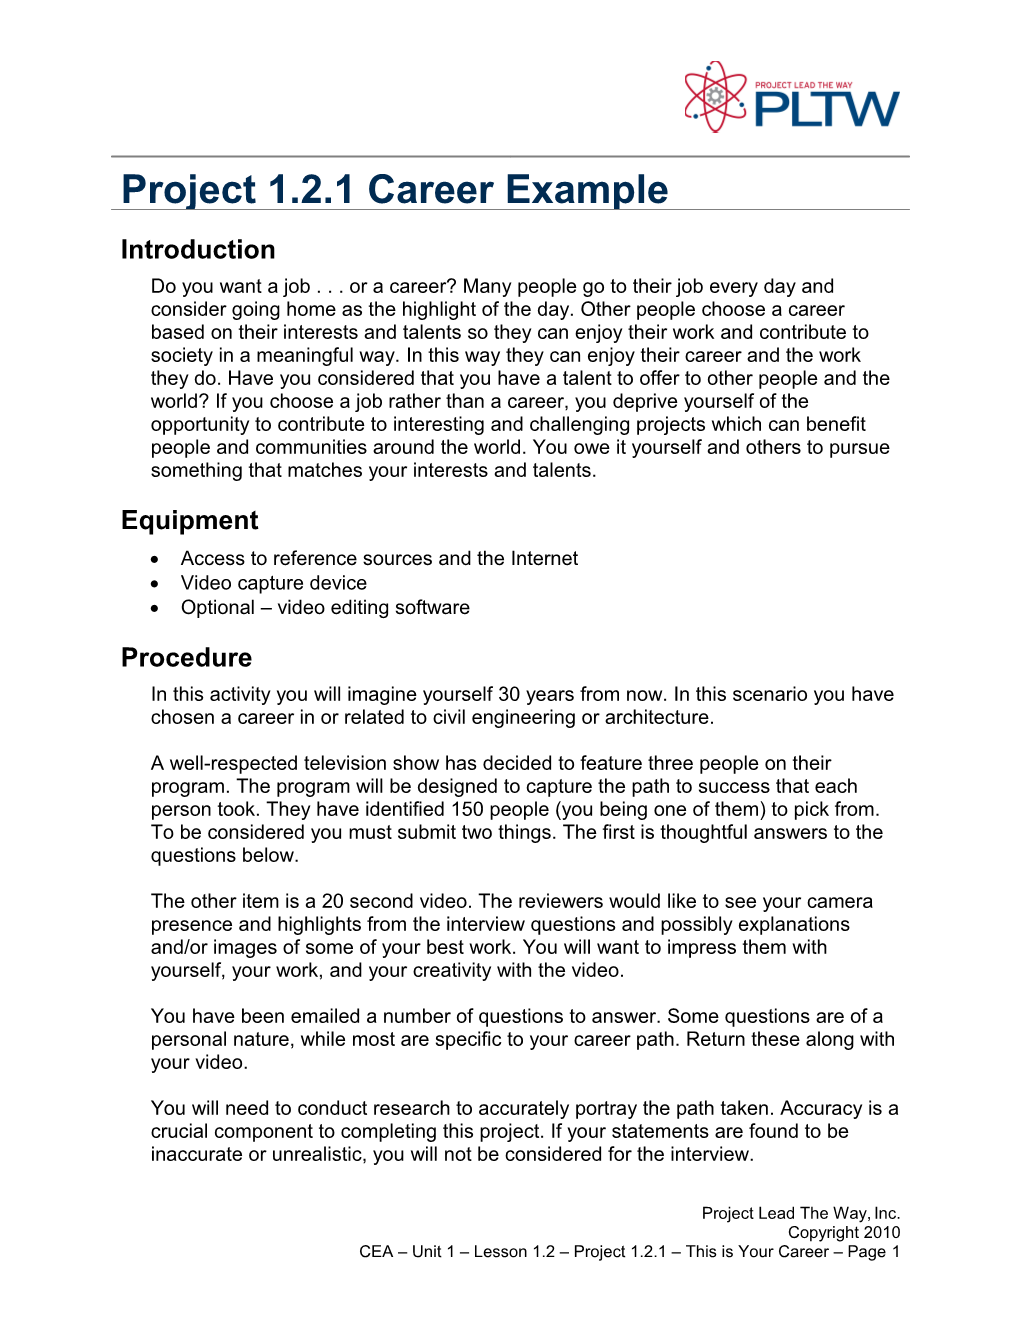 Project 1.2.1 This Is Your Career